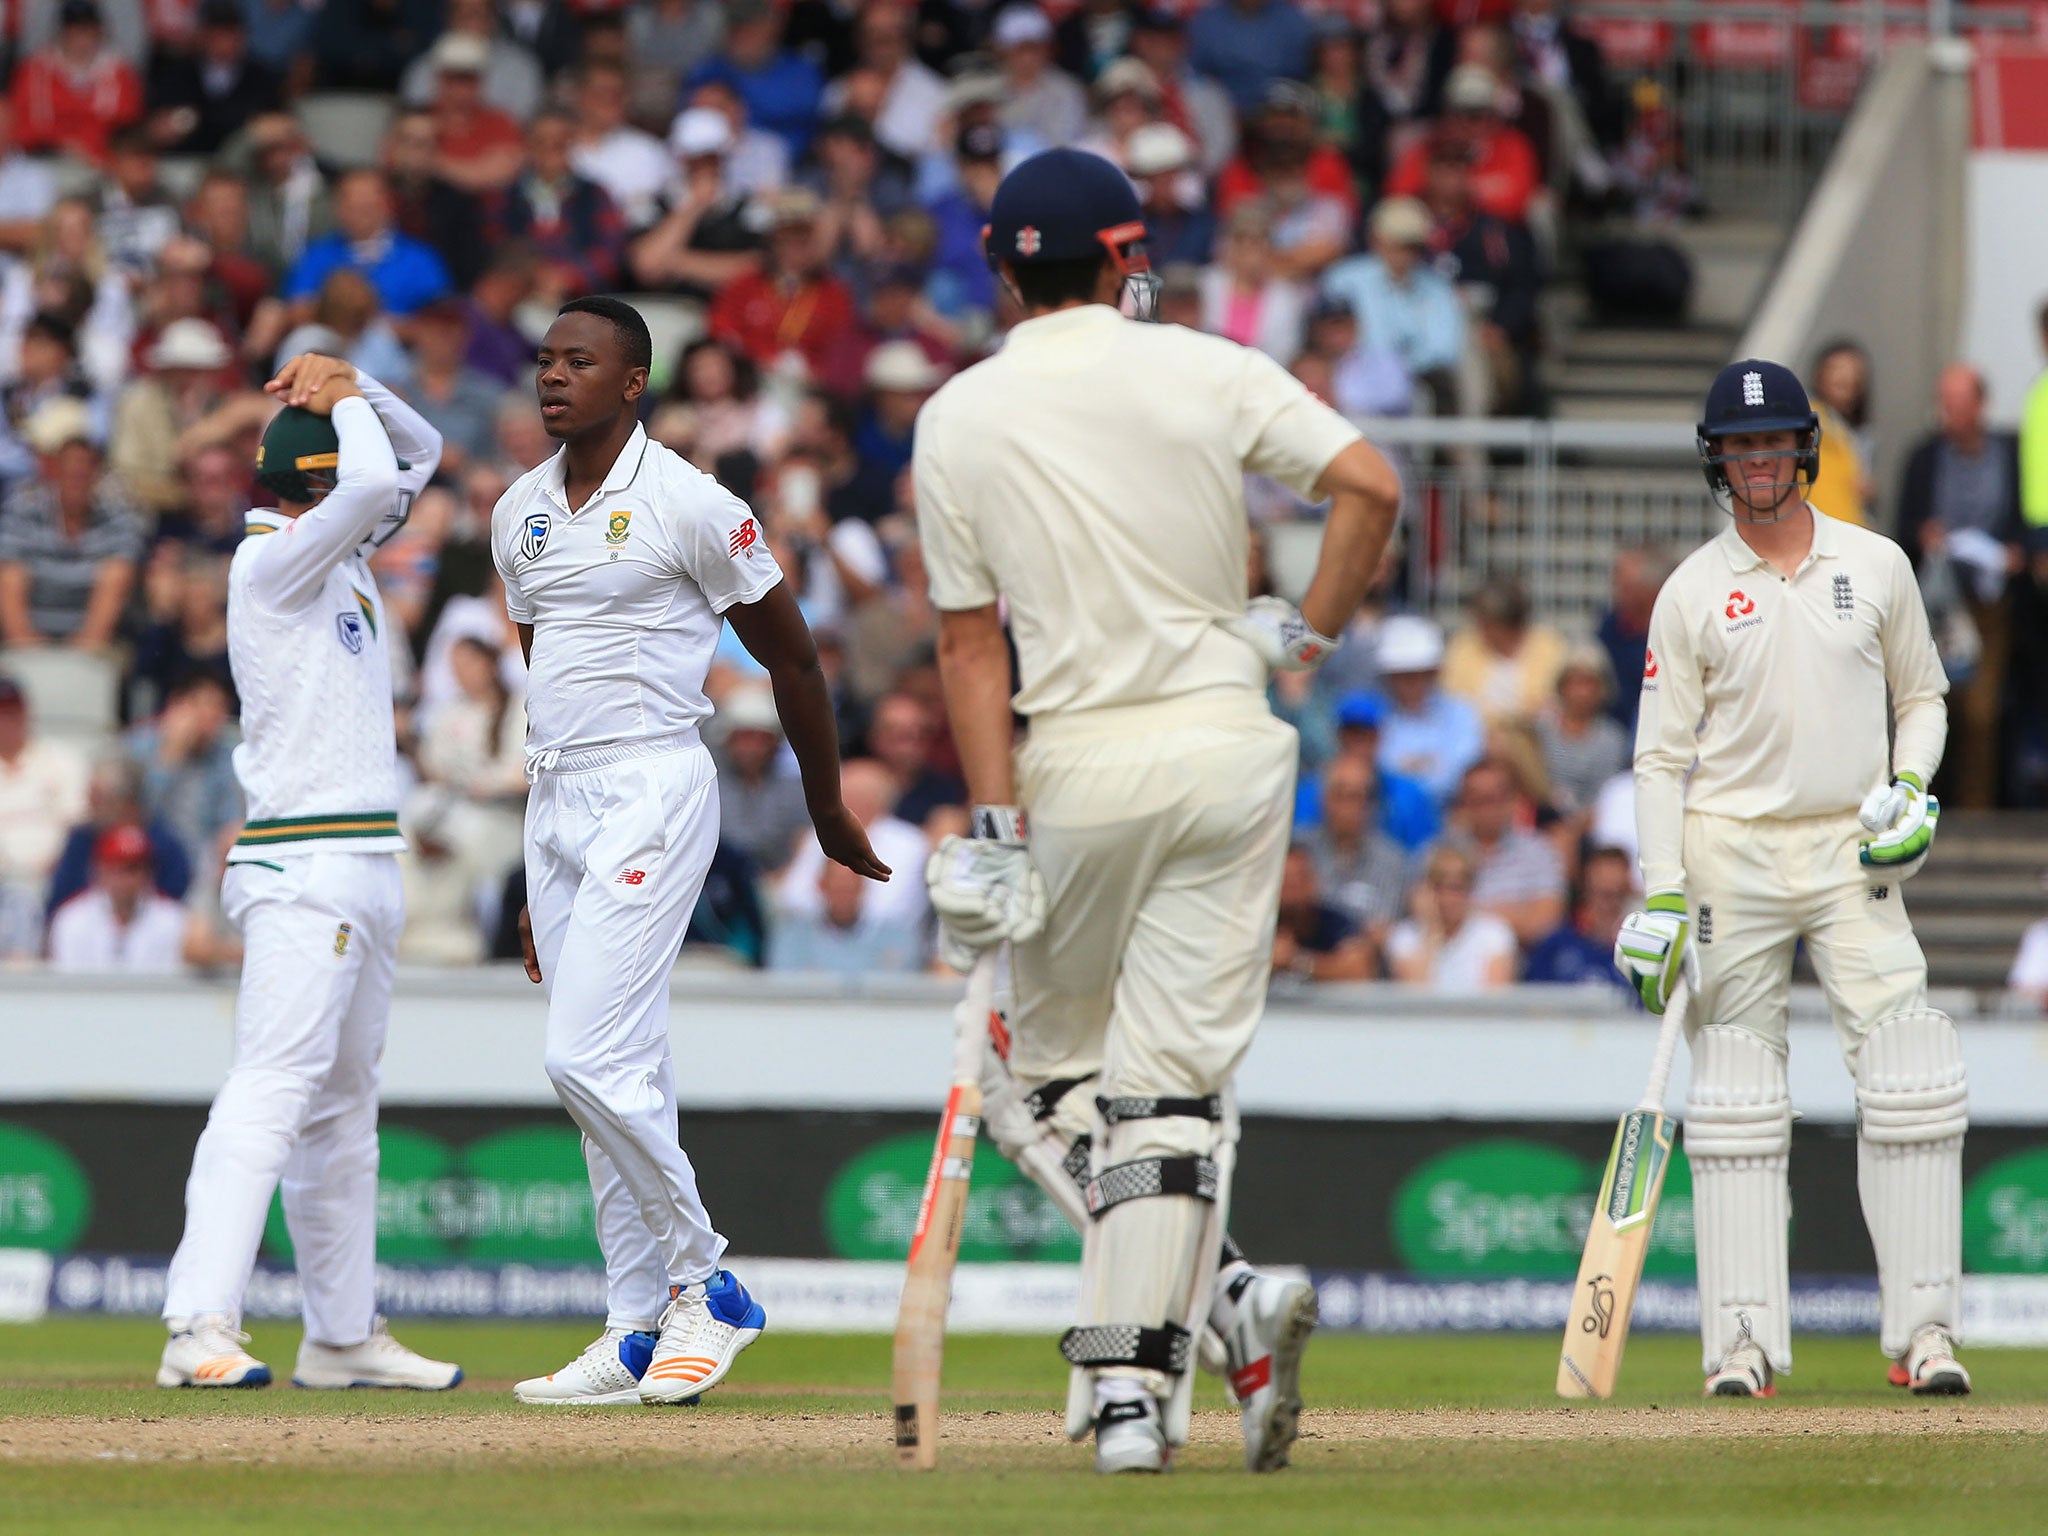 Kagiso Rabada reacts to a dropped catch by Quinton de Kock off the batting of Keaton Jennings